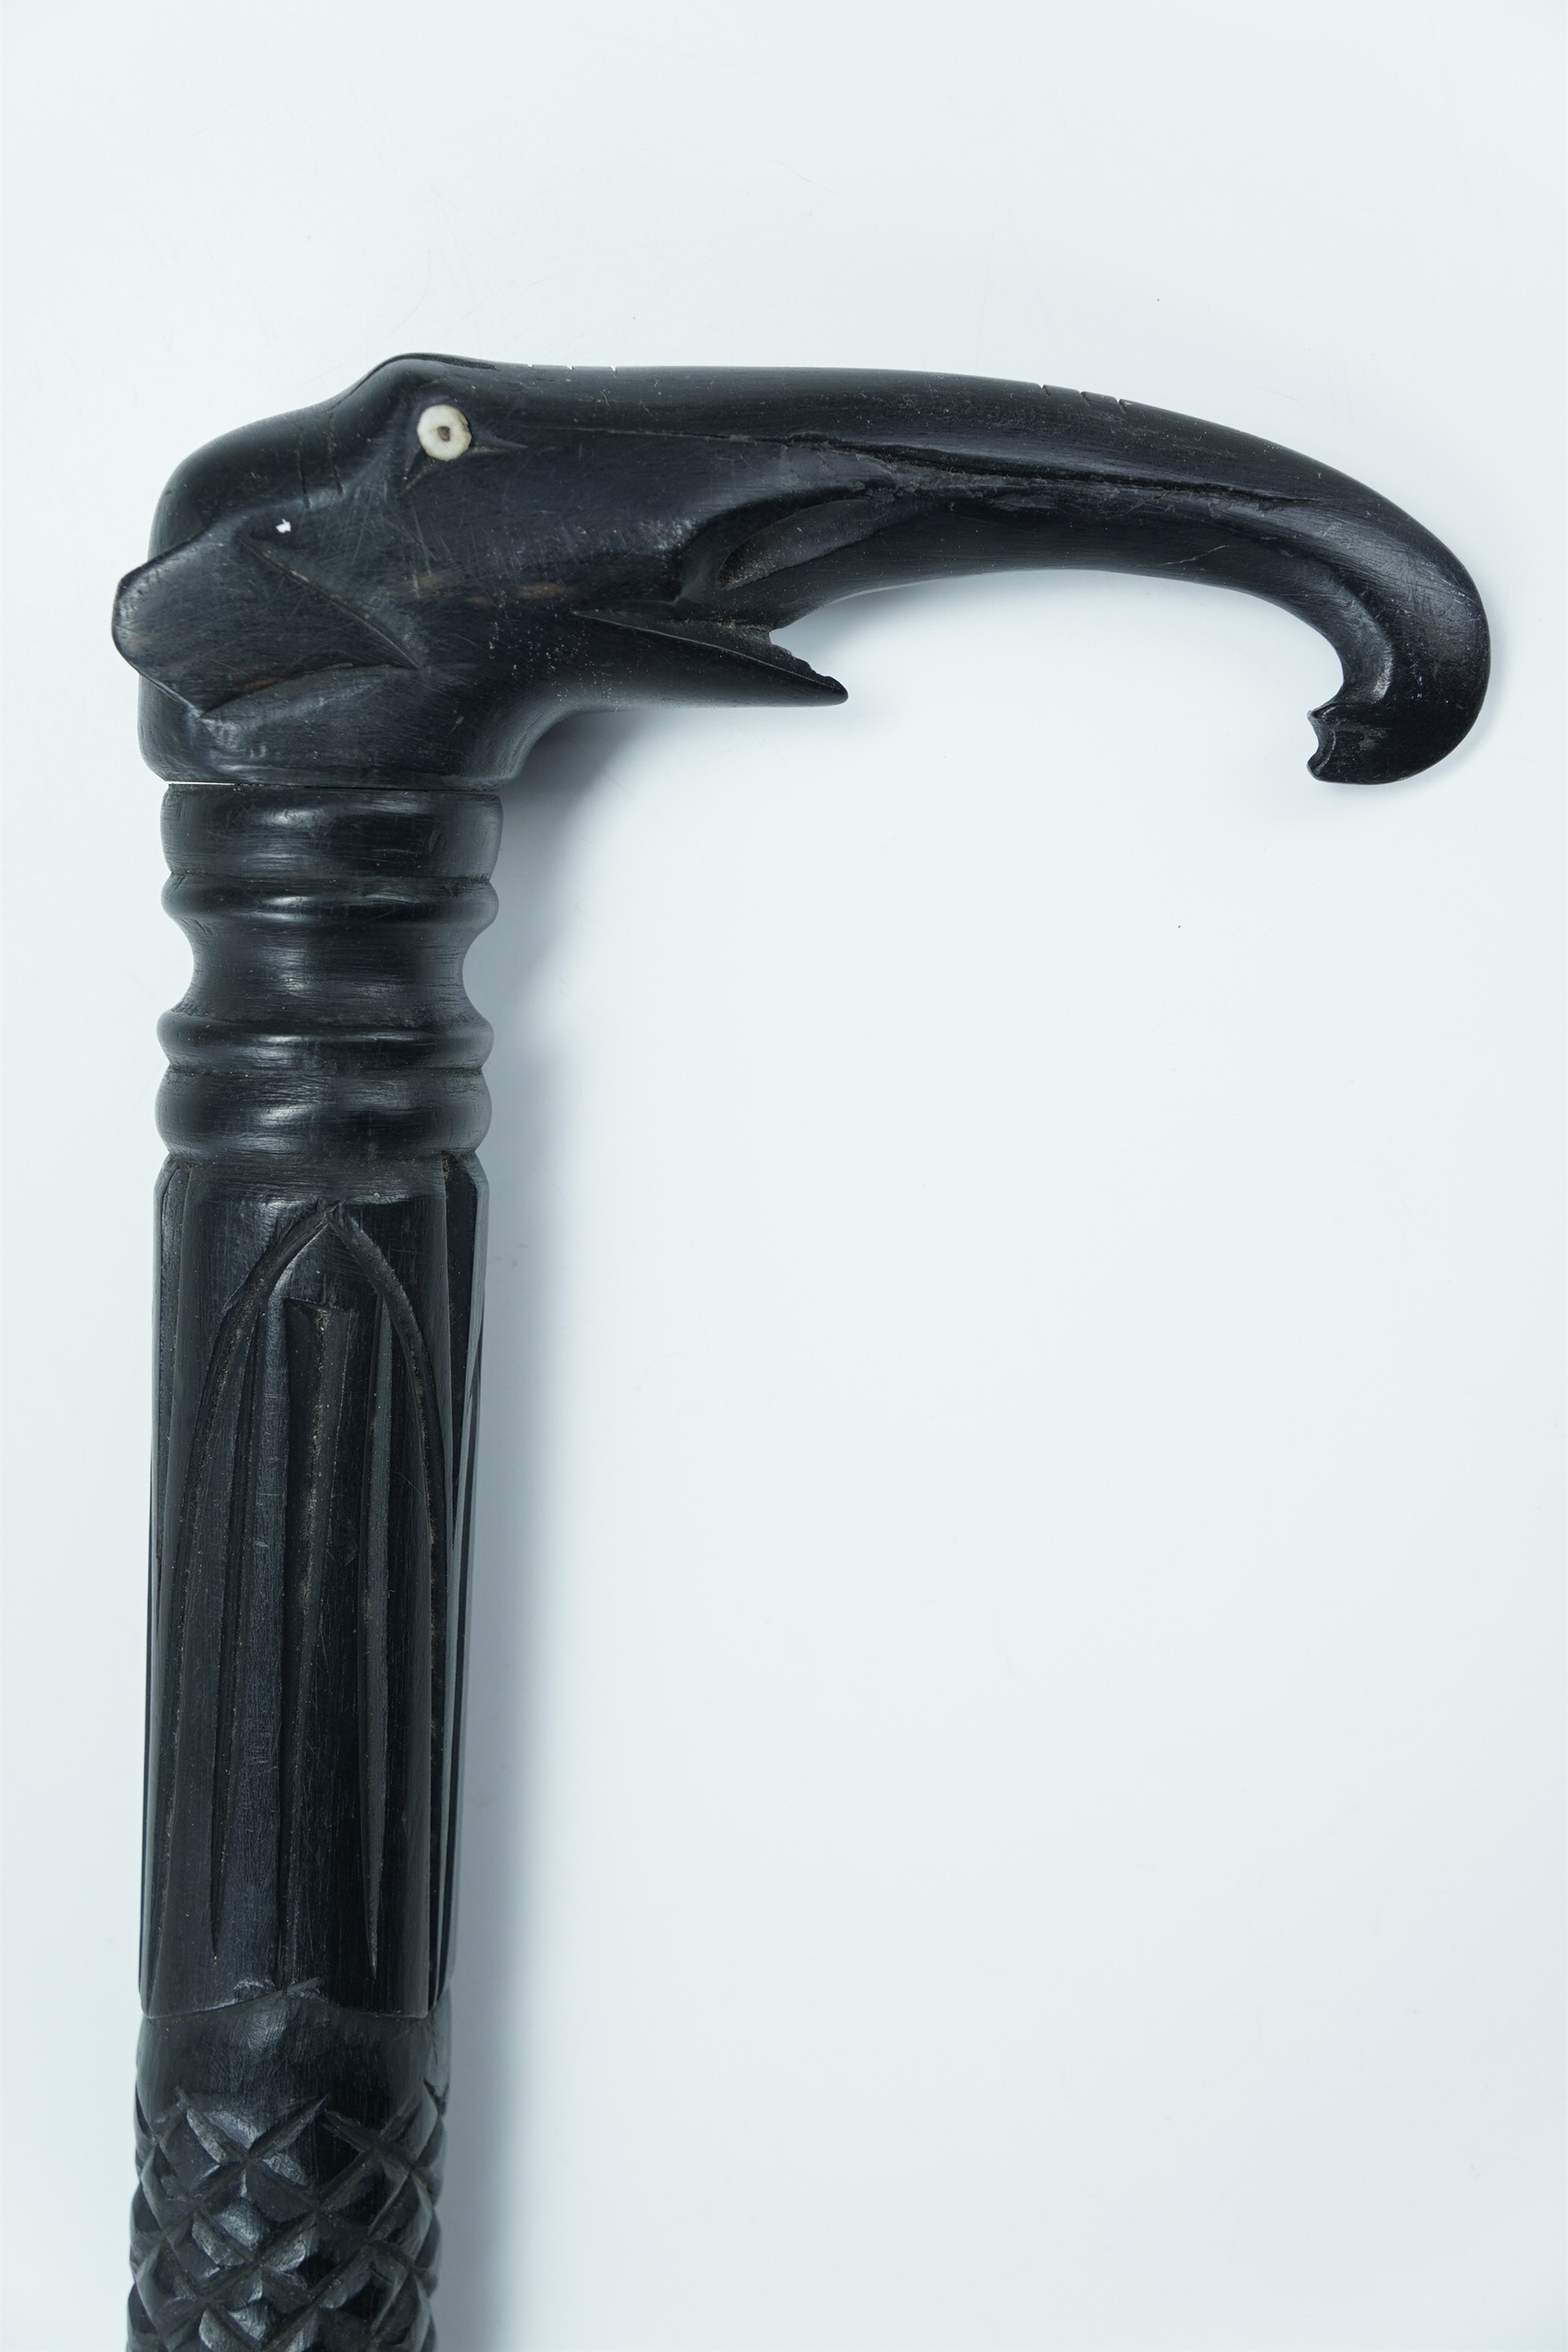 An Anglo-Indian carved ebony walking cane, its handle in the form of an elephant's head, 83 cm - Image 2 of 2